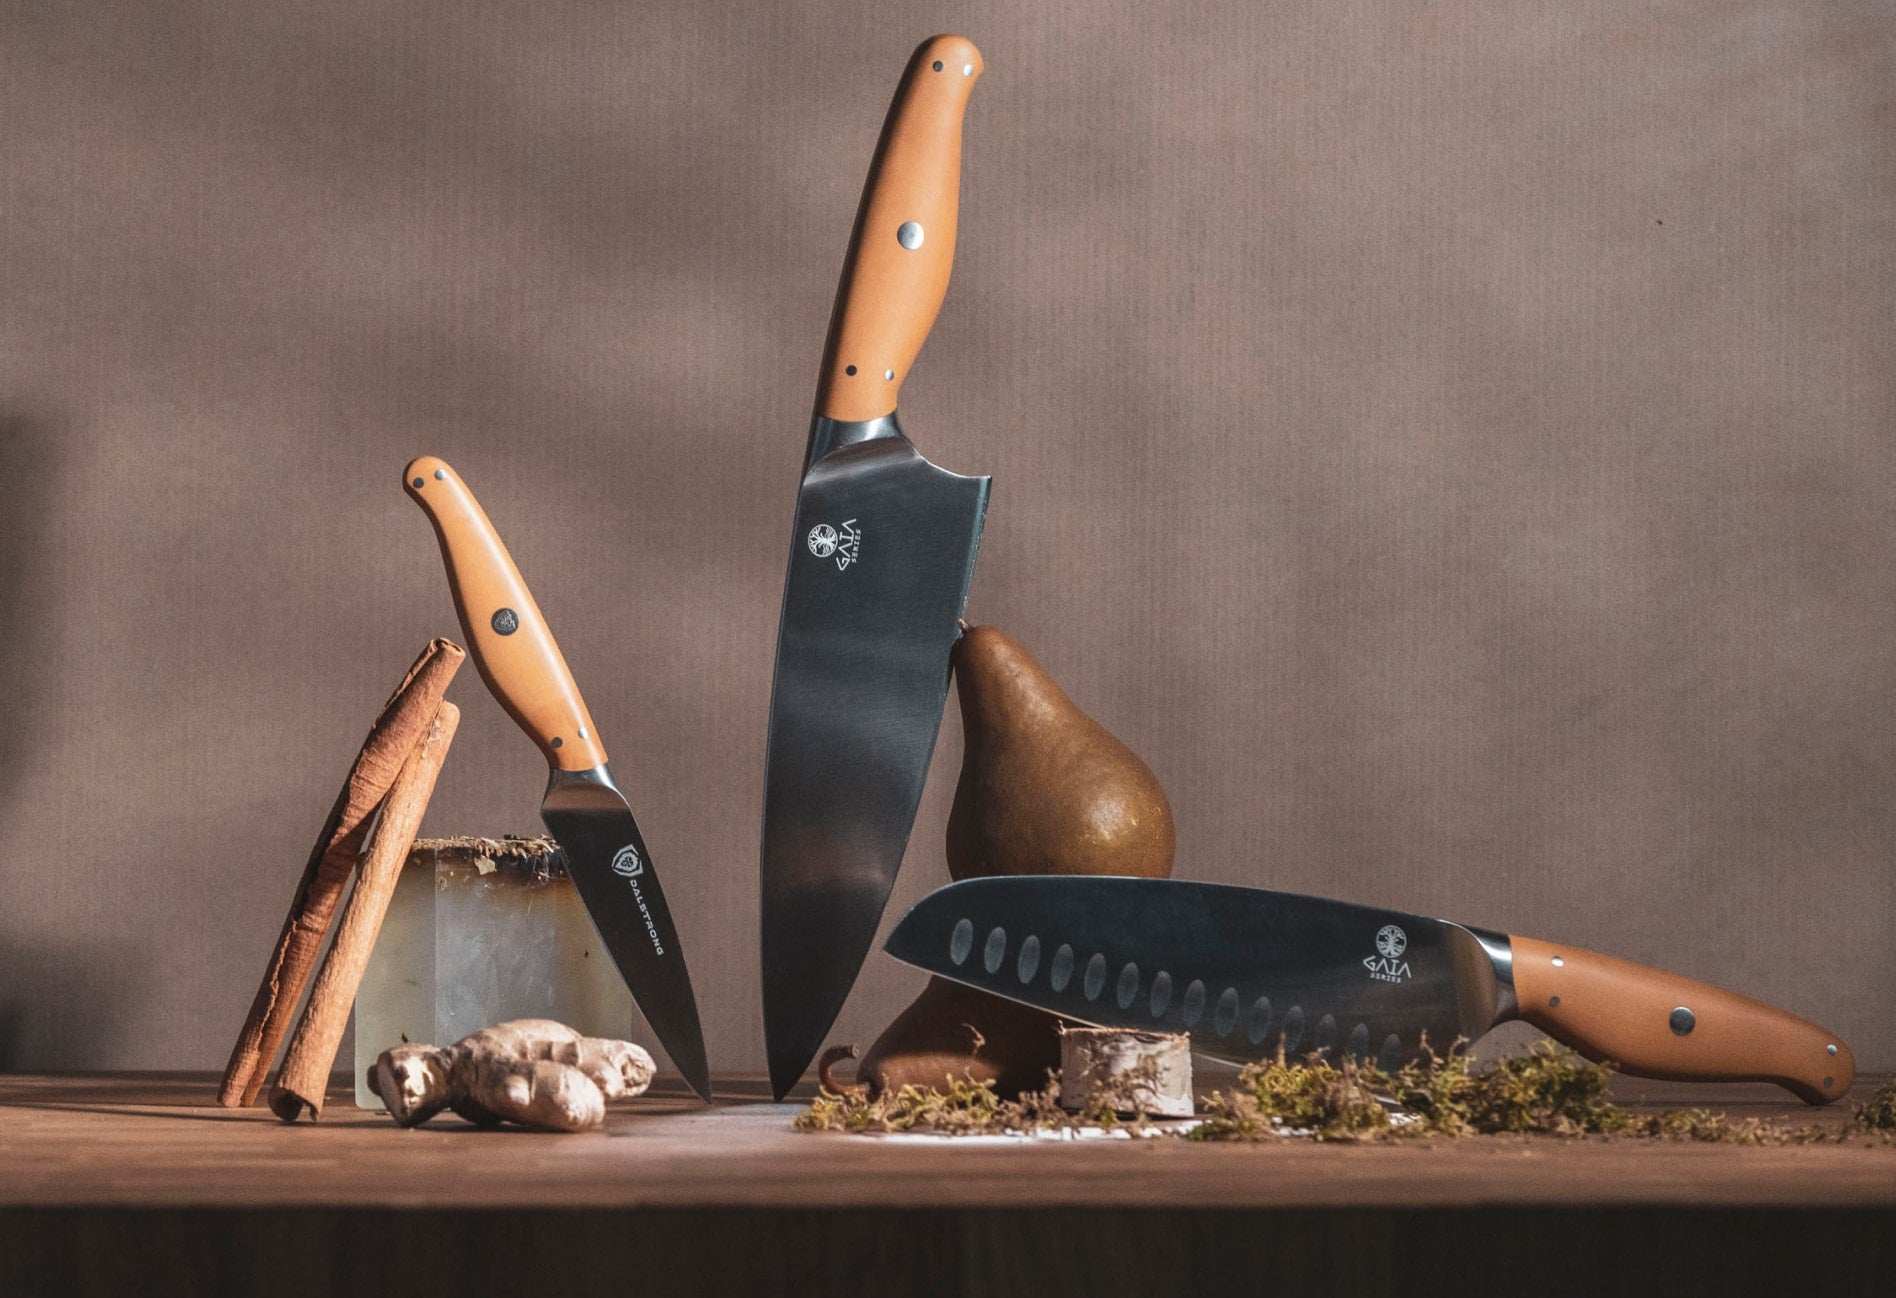 3-Piece Knife Set | Chef - Santoku - Paring | Sustainable and Earth-friendly Material | Gaia Series | Dalstrong © (image background)